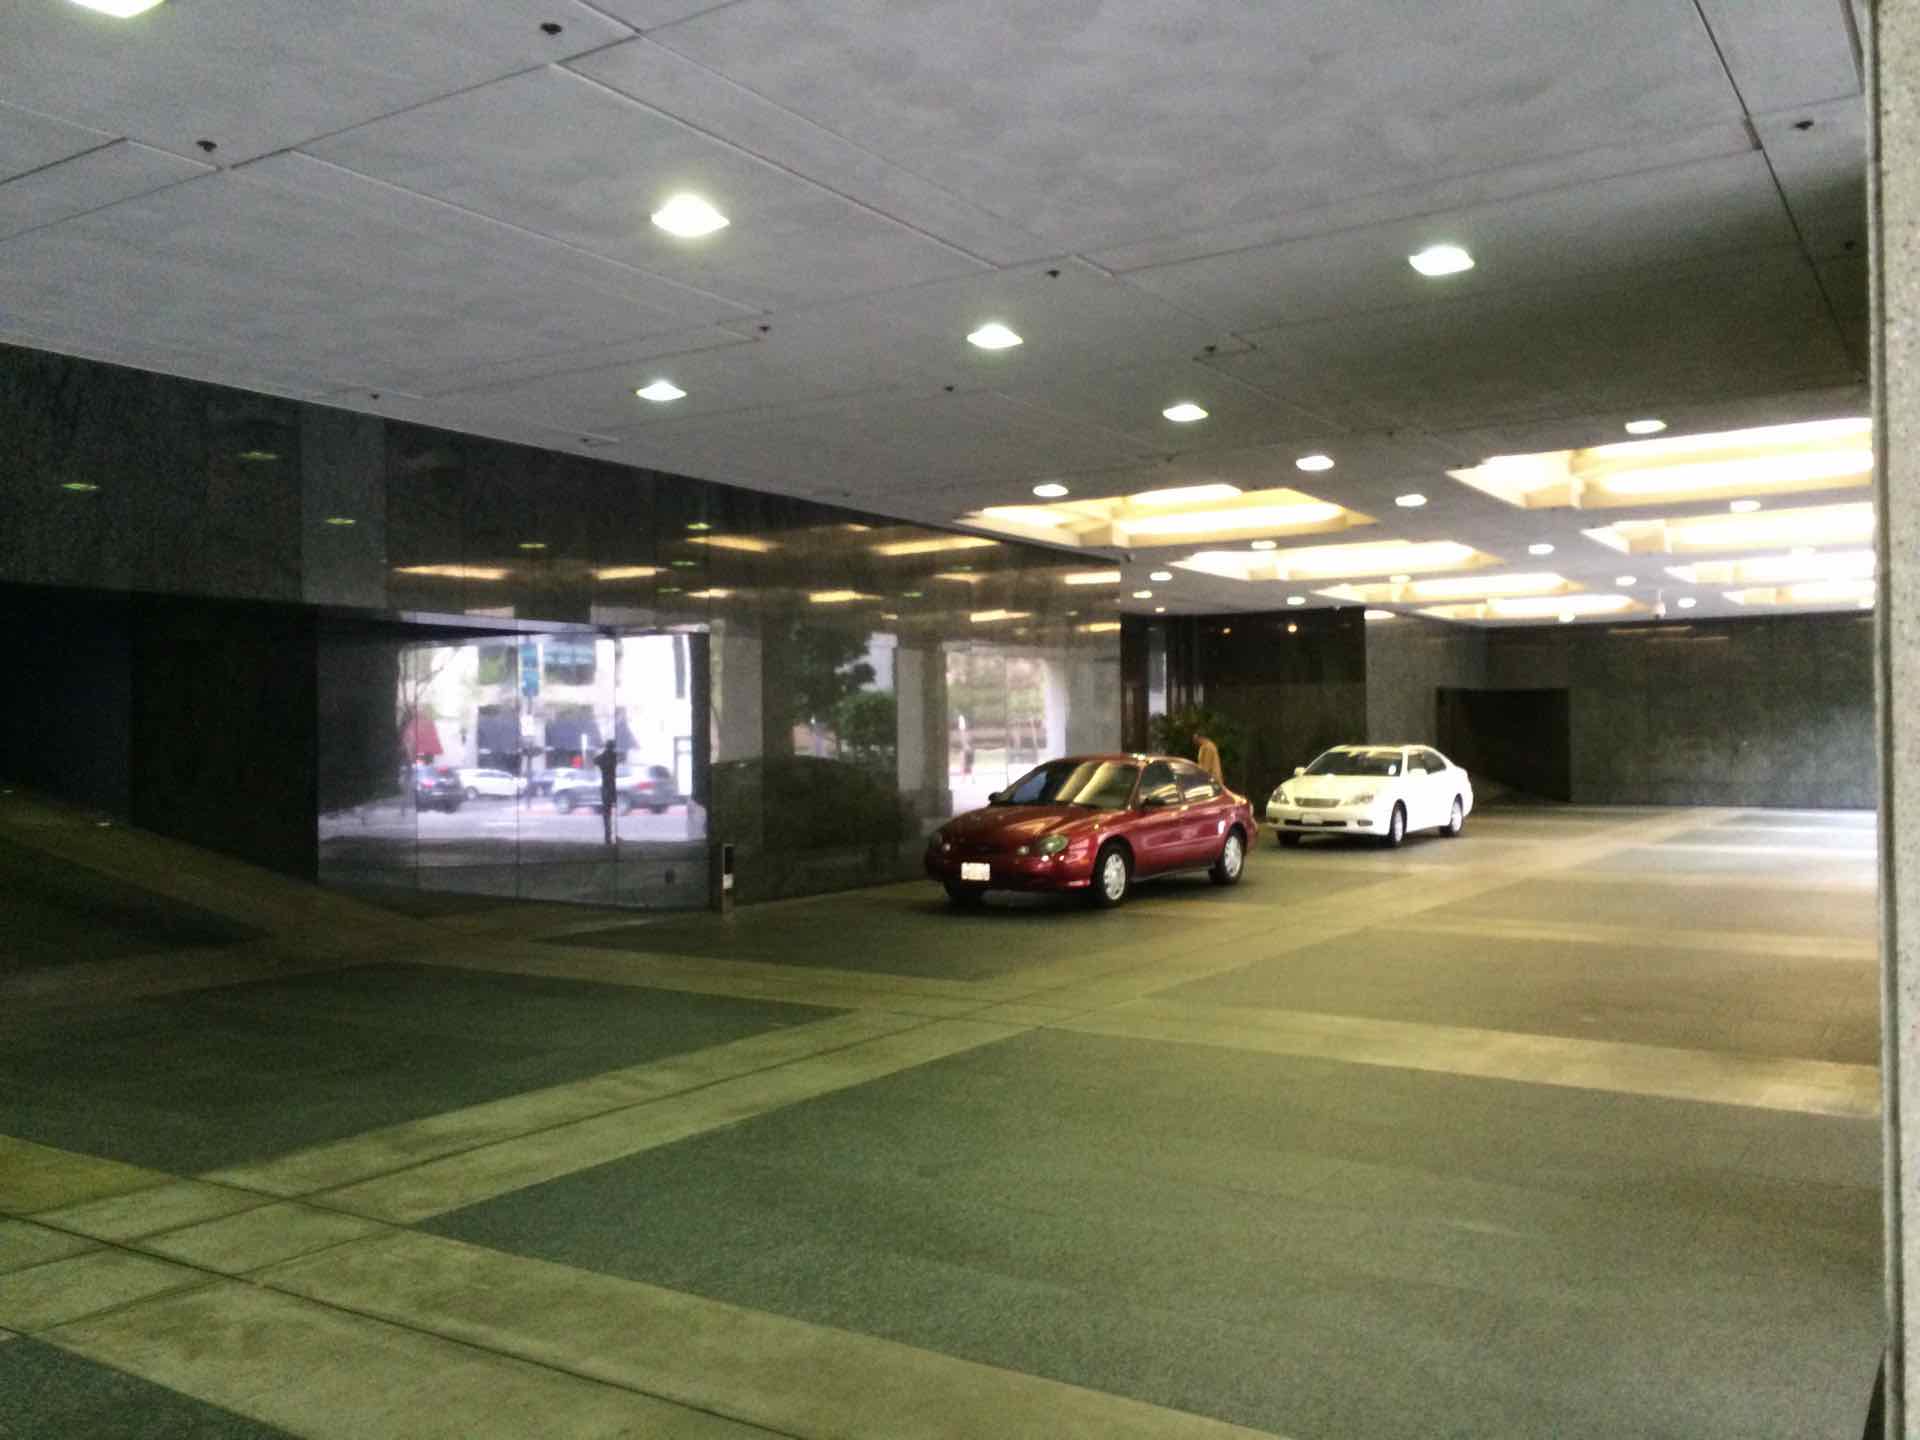 Drive Up Entrance with Valet Parking in downtown San Diego building